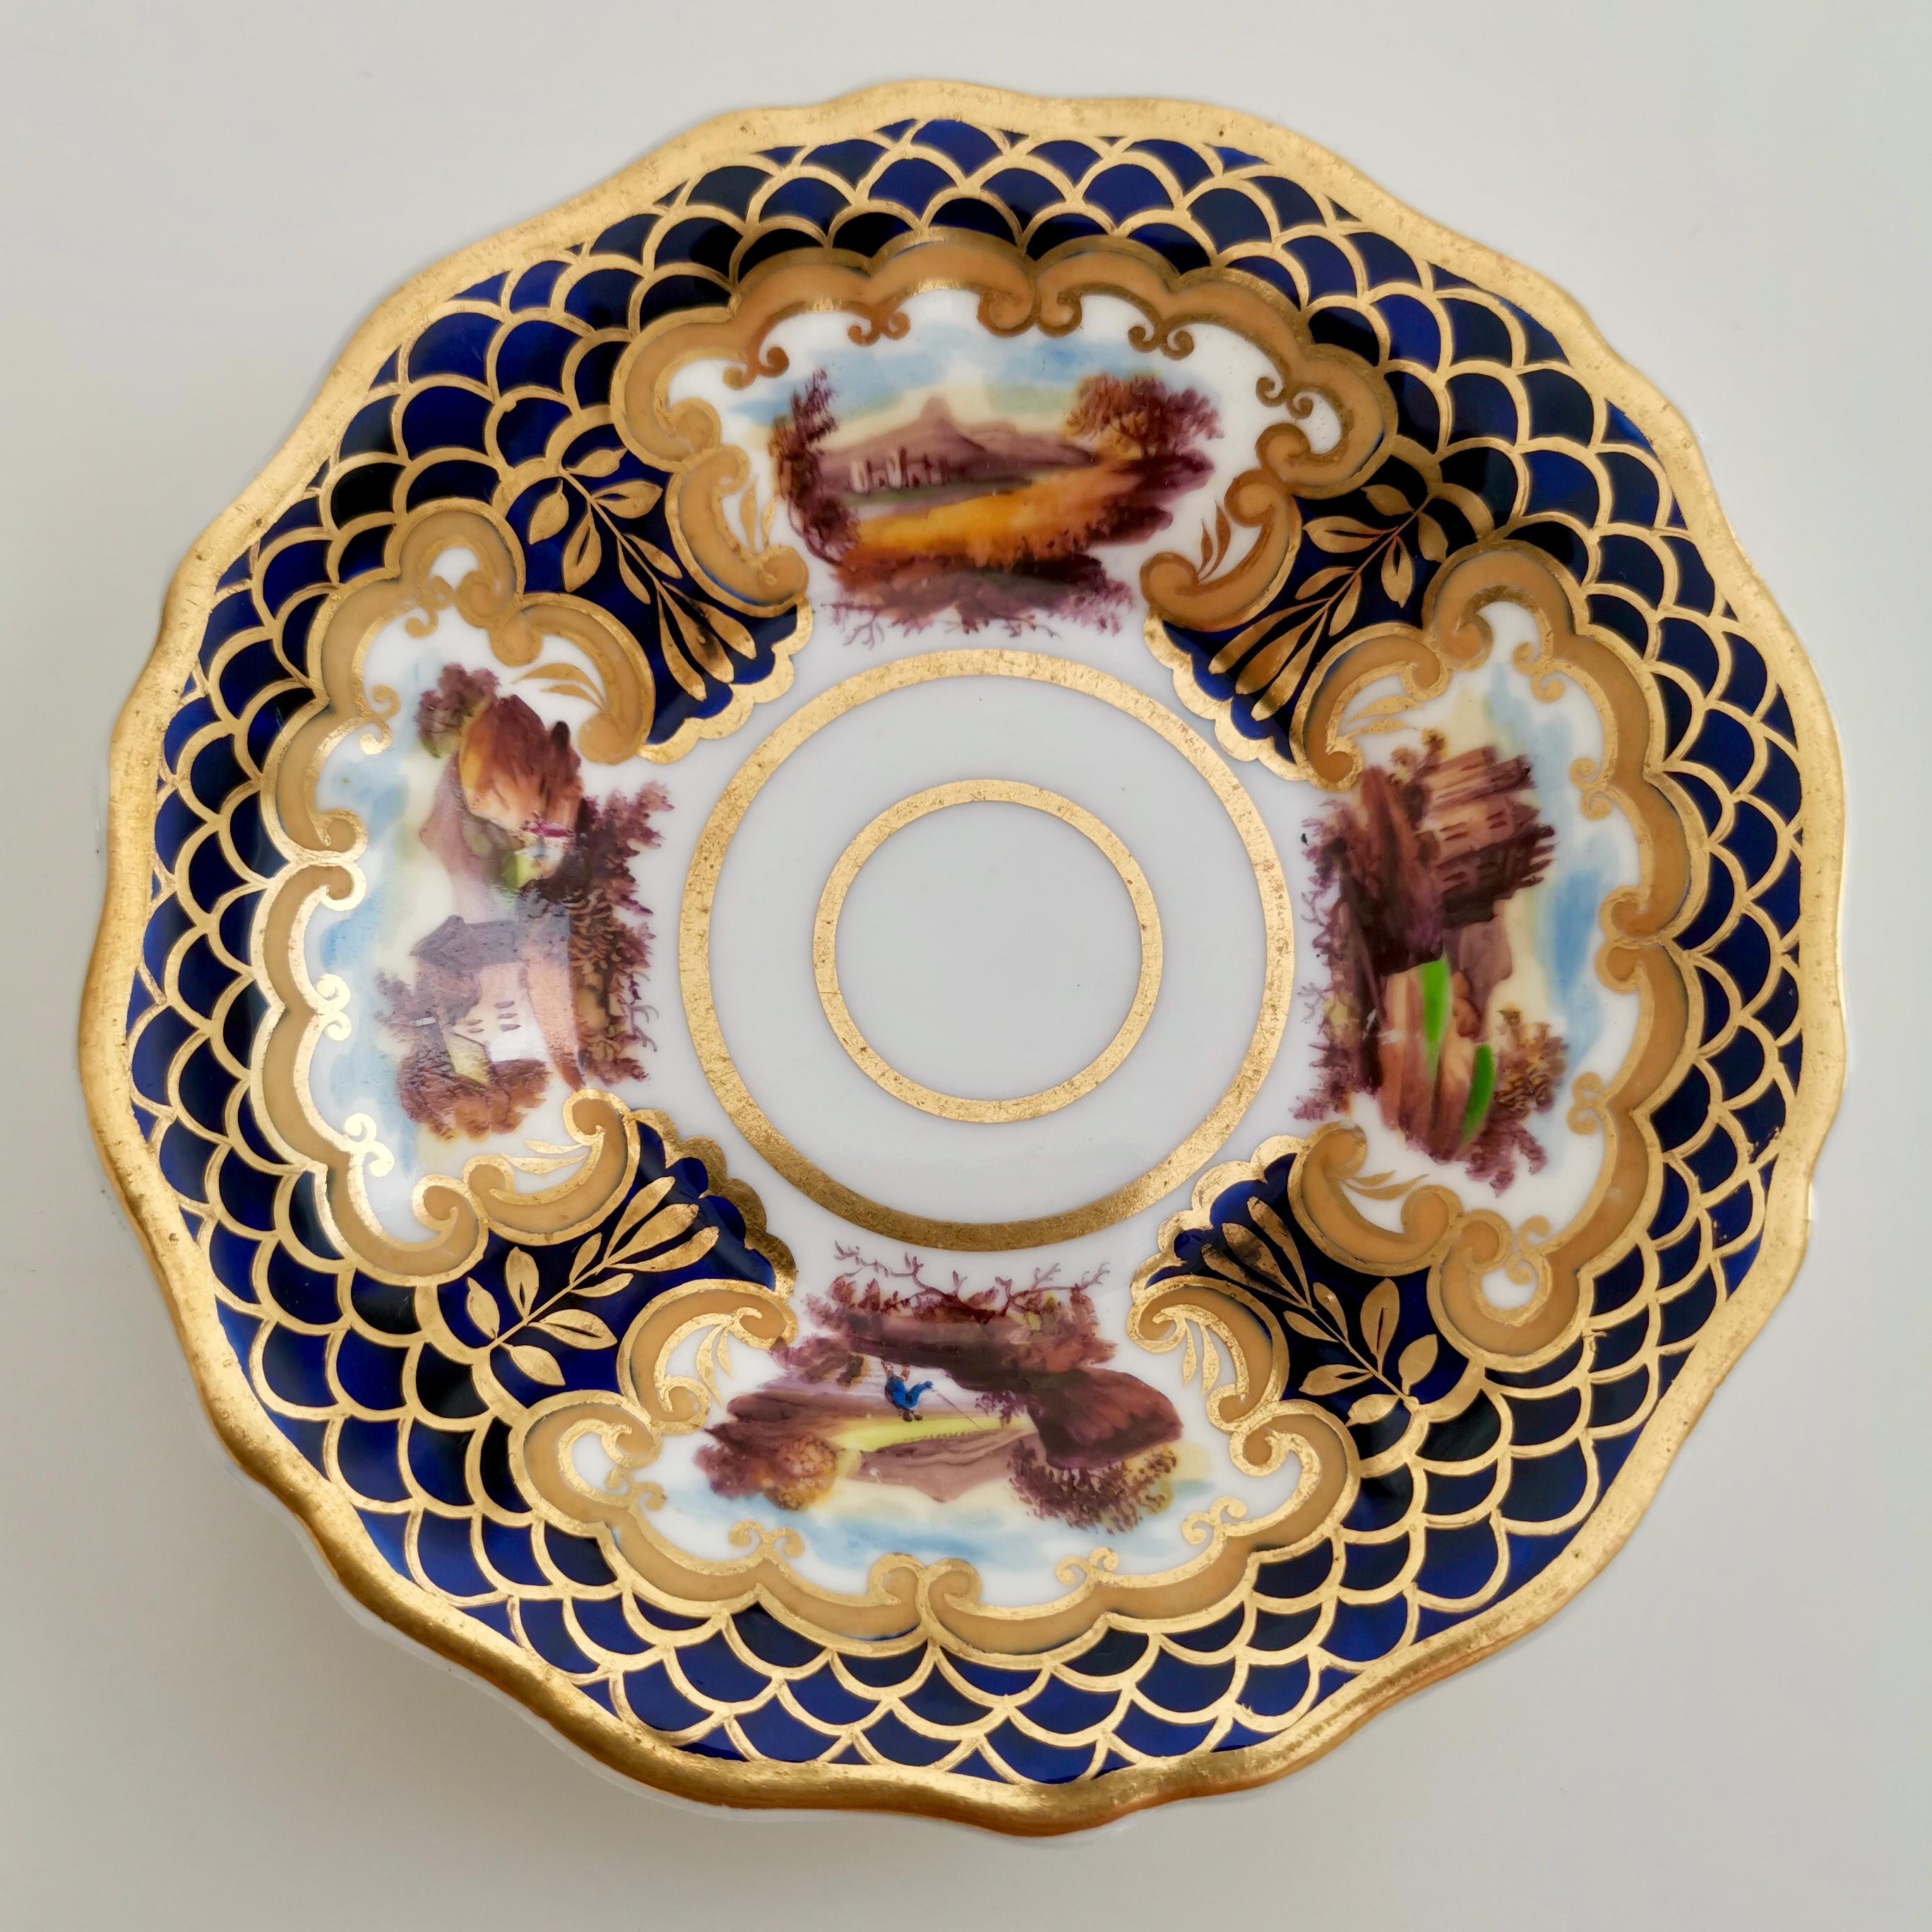 Hand-Painted Rare Ridgway Coffee Cup, Cobalt Blue, Gilt and Sublime Landscapes, circa 1825